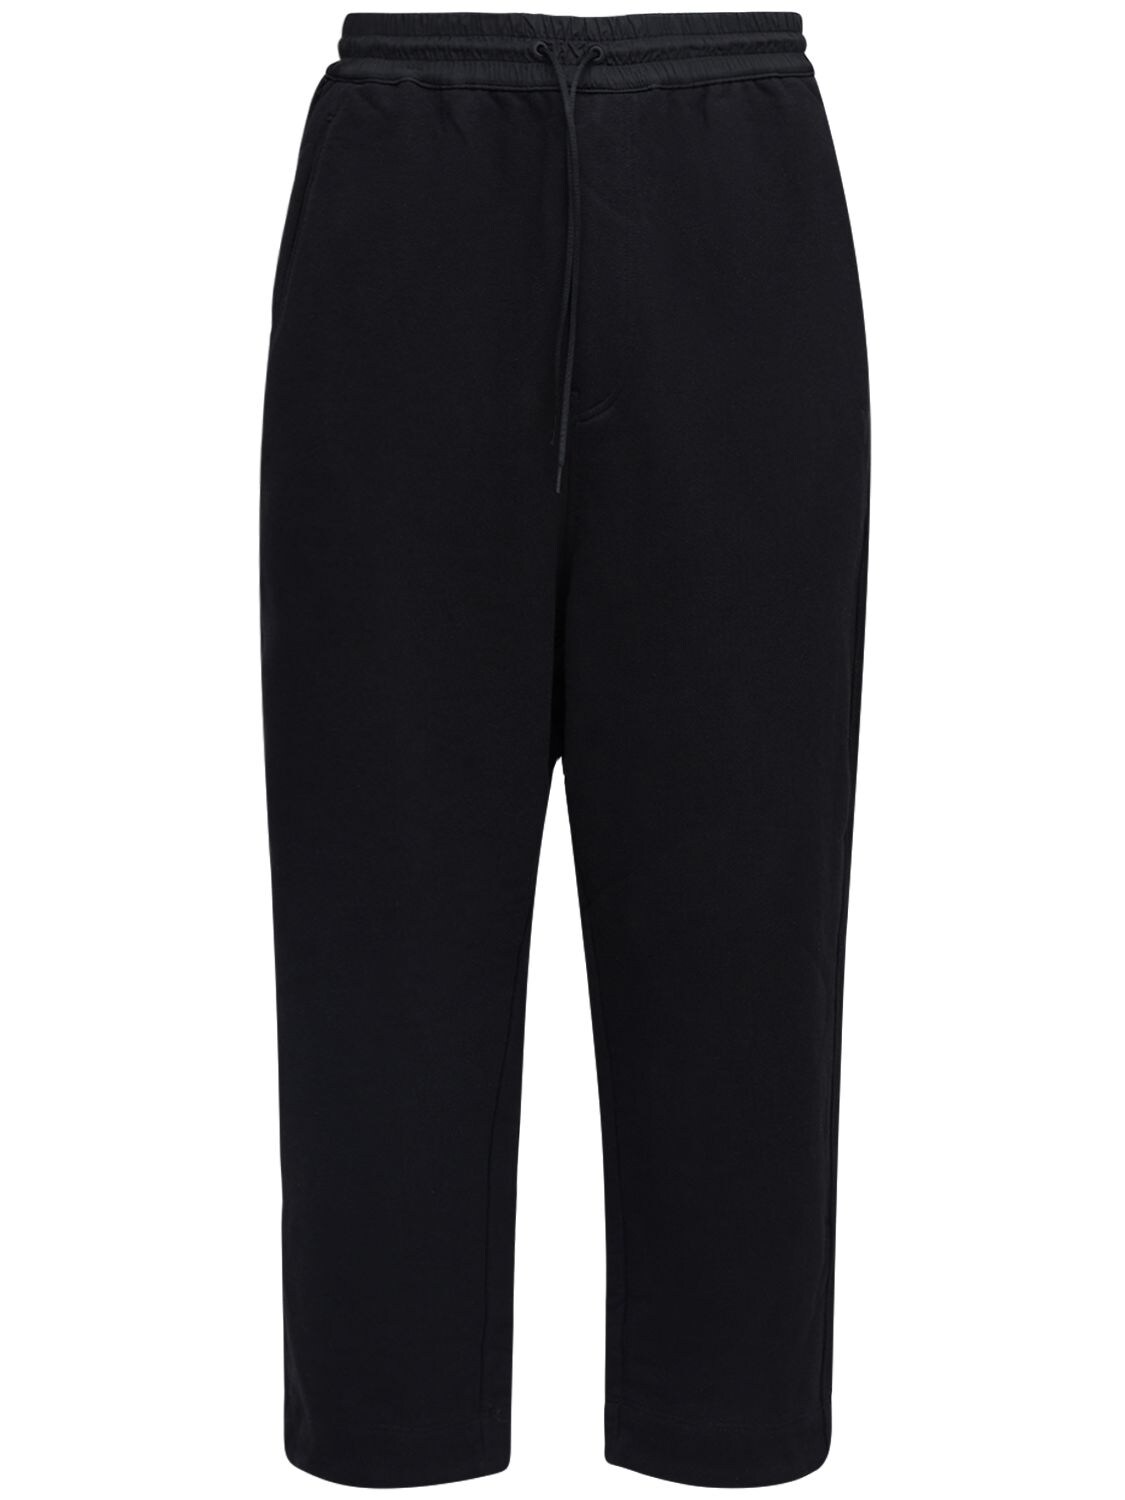 Y-3 CLASSIC TERRY CROPPED TRACK trousers,72I0E6020-QKXBQ0S1